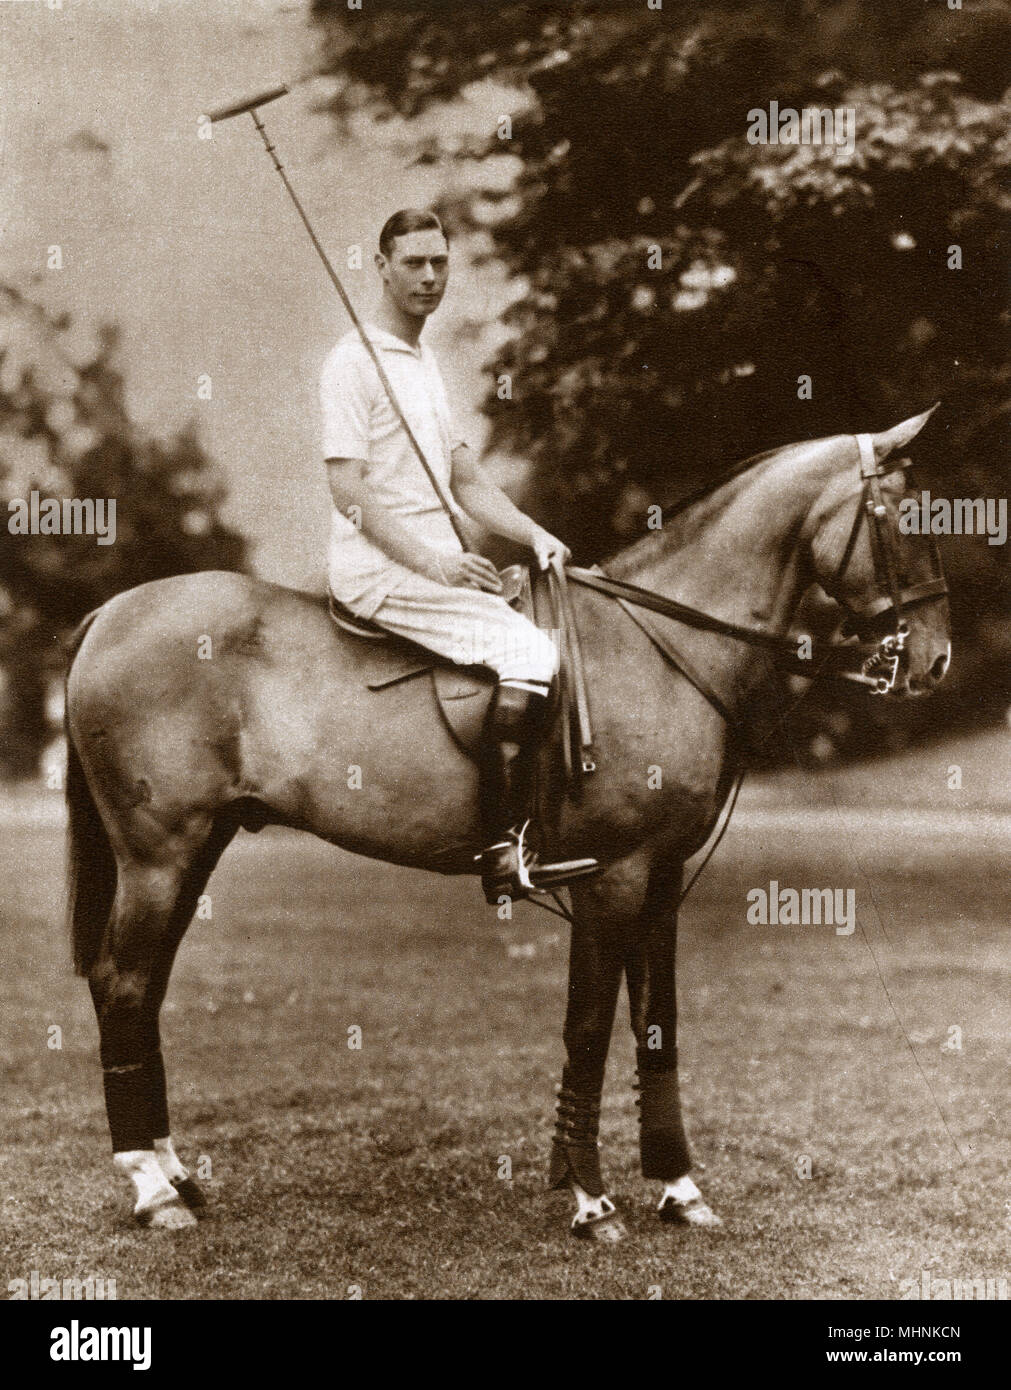 Albert, Duke of York (1895-1952) (later King George VI) playing Polo - posing seated on his favourite pony just before taking part in this 'strenuous sport'.     Date: 1923 Stock Photo